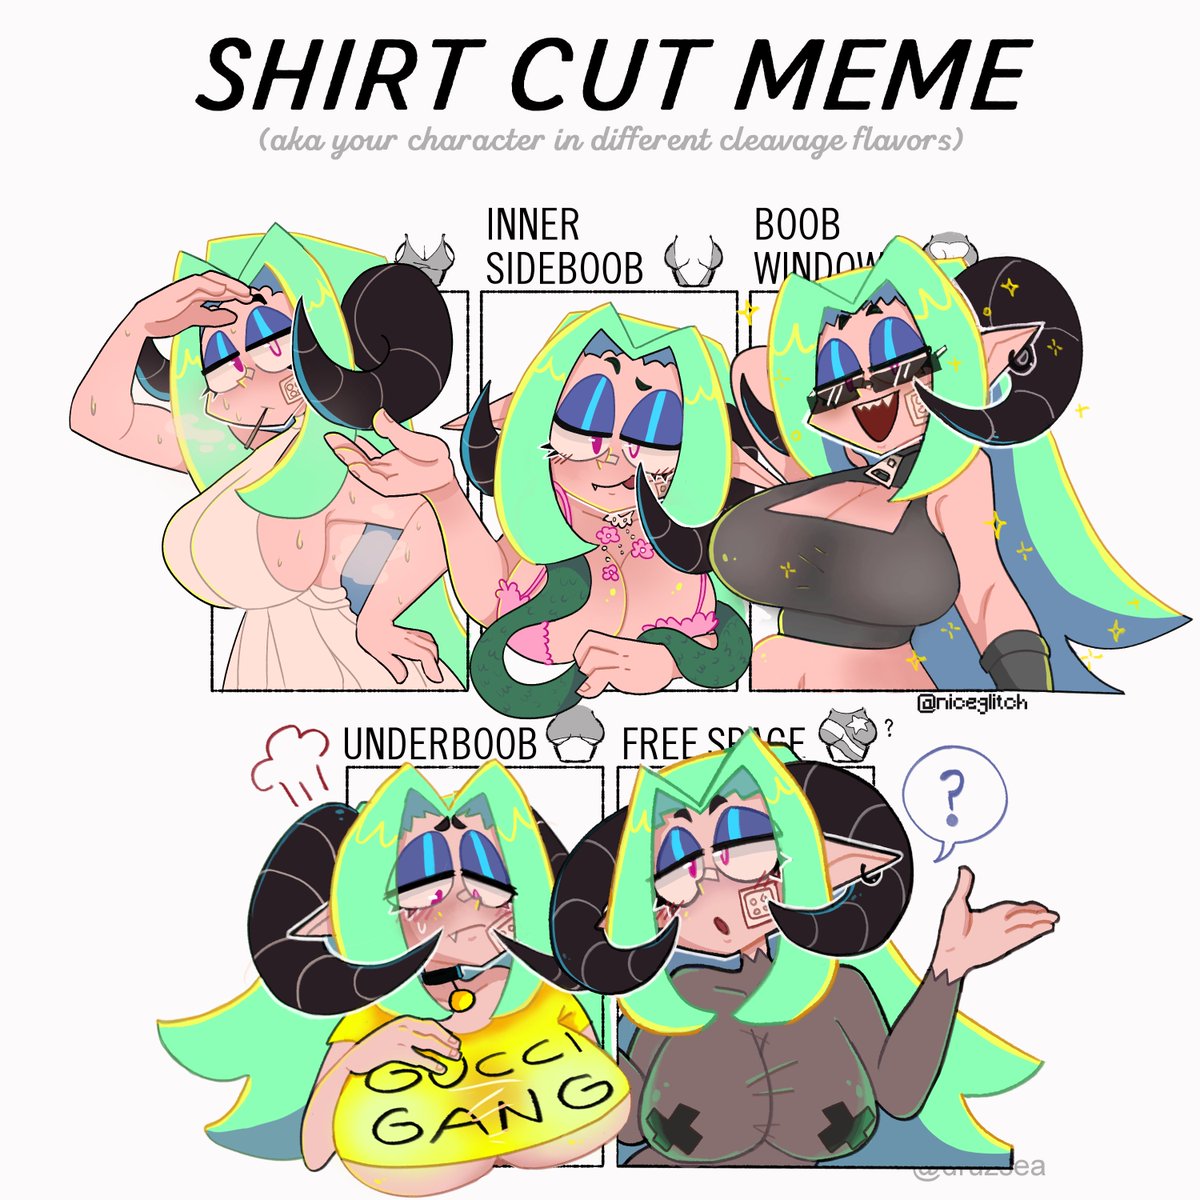 old ass meme but managed to finish it #shirtcutmeme 